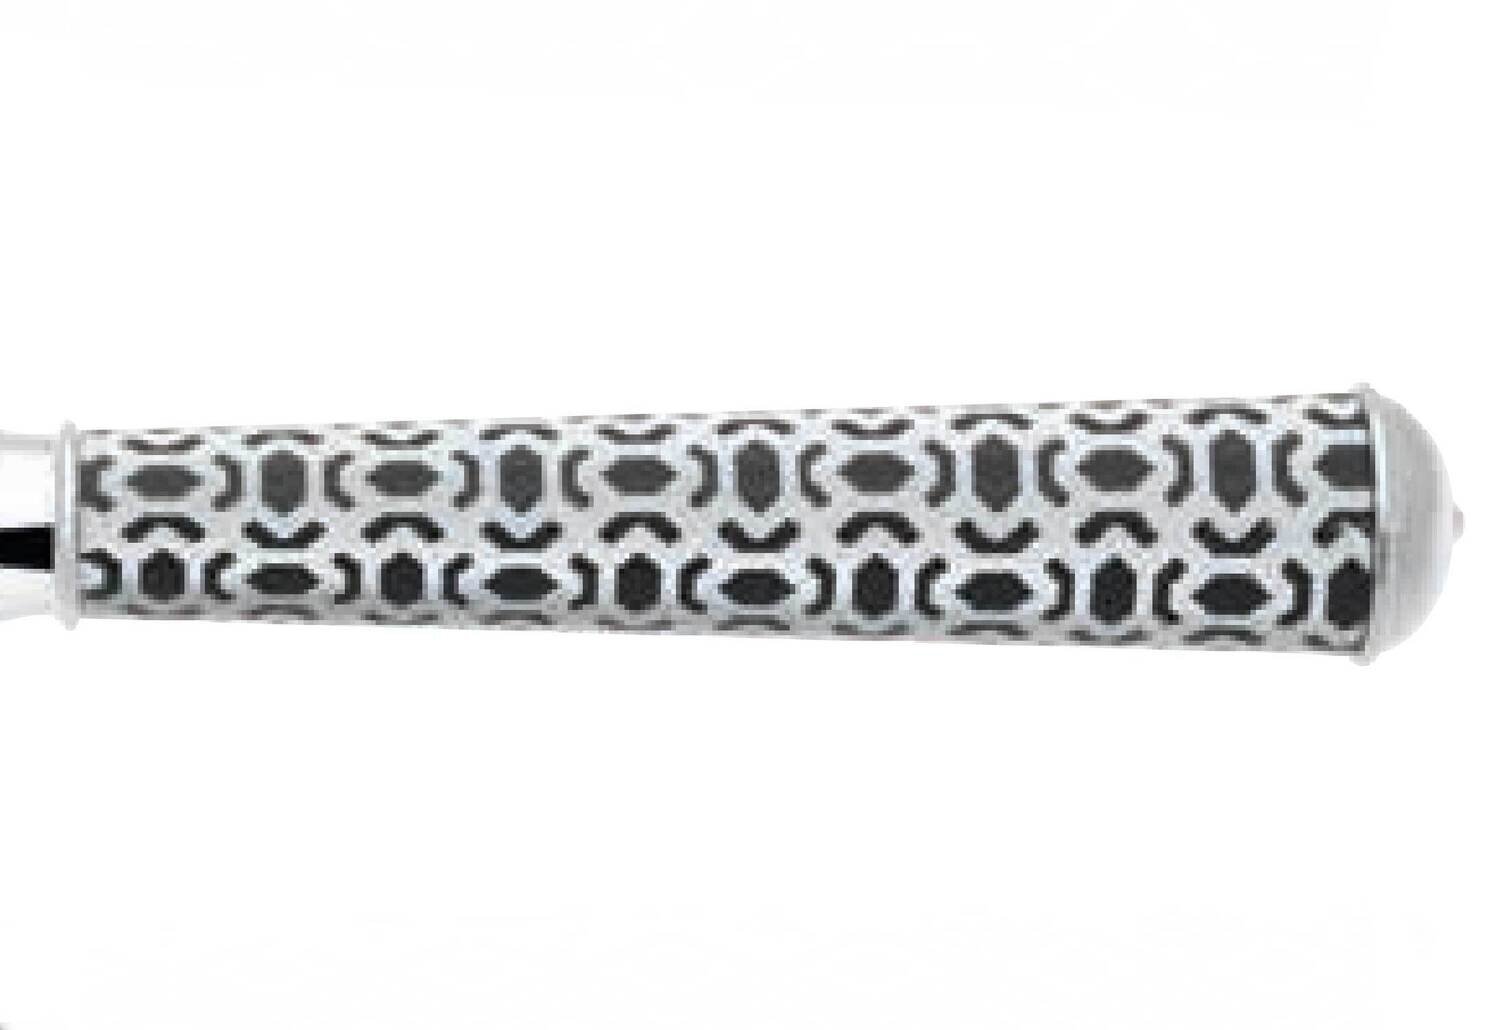 Ercuis Mosaique Black Individual Butter Knife 5.125 Inch Silver Plated Part Golded F602531-27